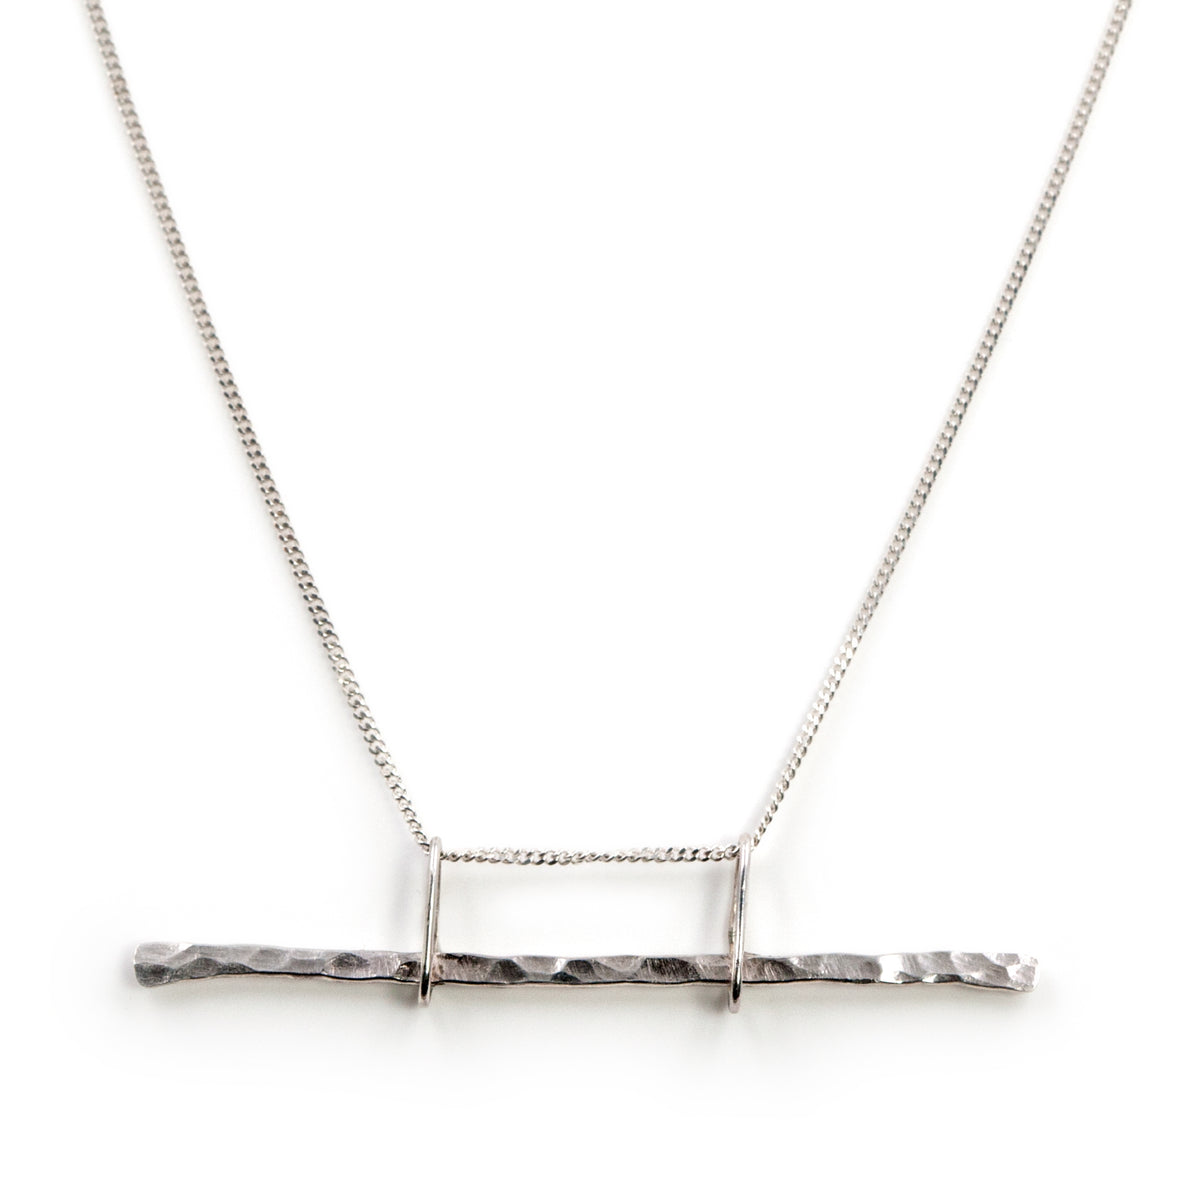 Sterling silver Parallax necklace by Rouaida.